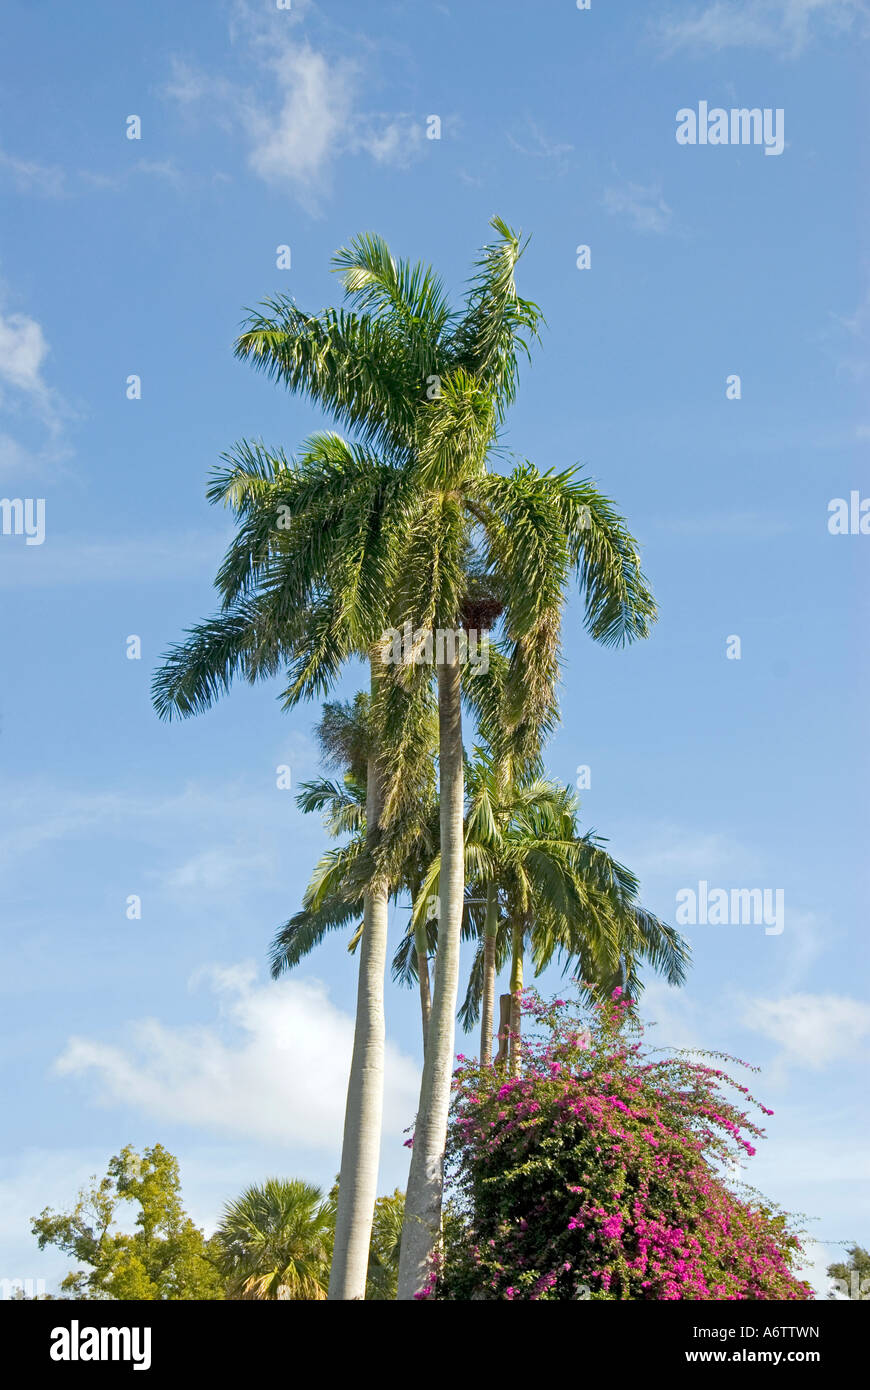 Royal palm trees at Thomas Edison winter home estate in Fort Myers Florida, a major  tourist attraction Stock Photo